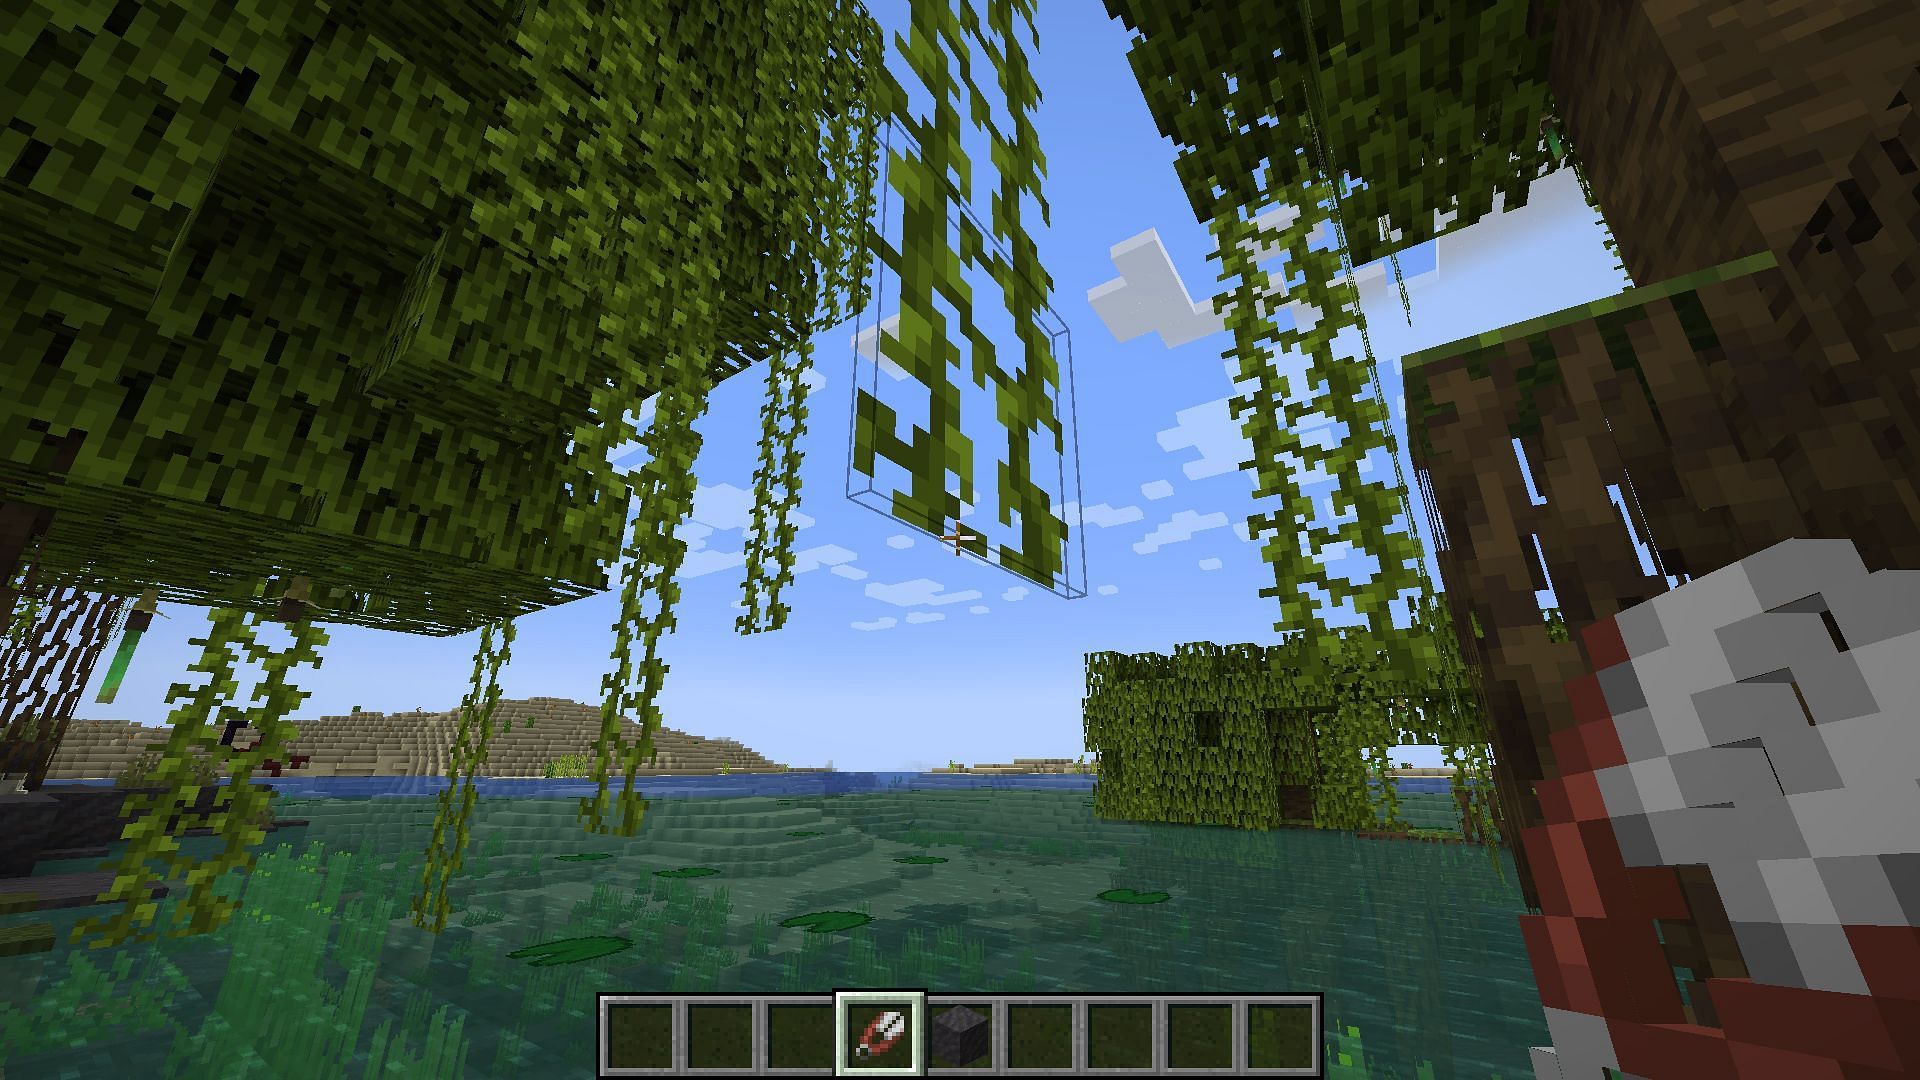 Players can obtain certain fragile items by breaking them with shears in Minecraft (Image via Mojang)